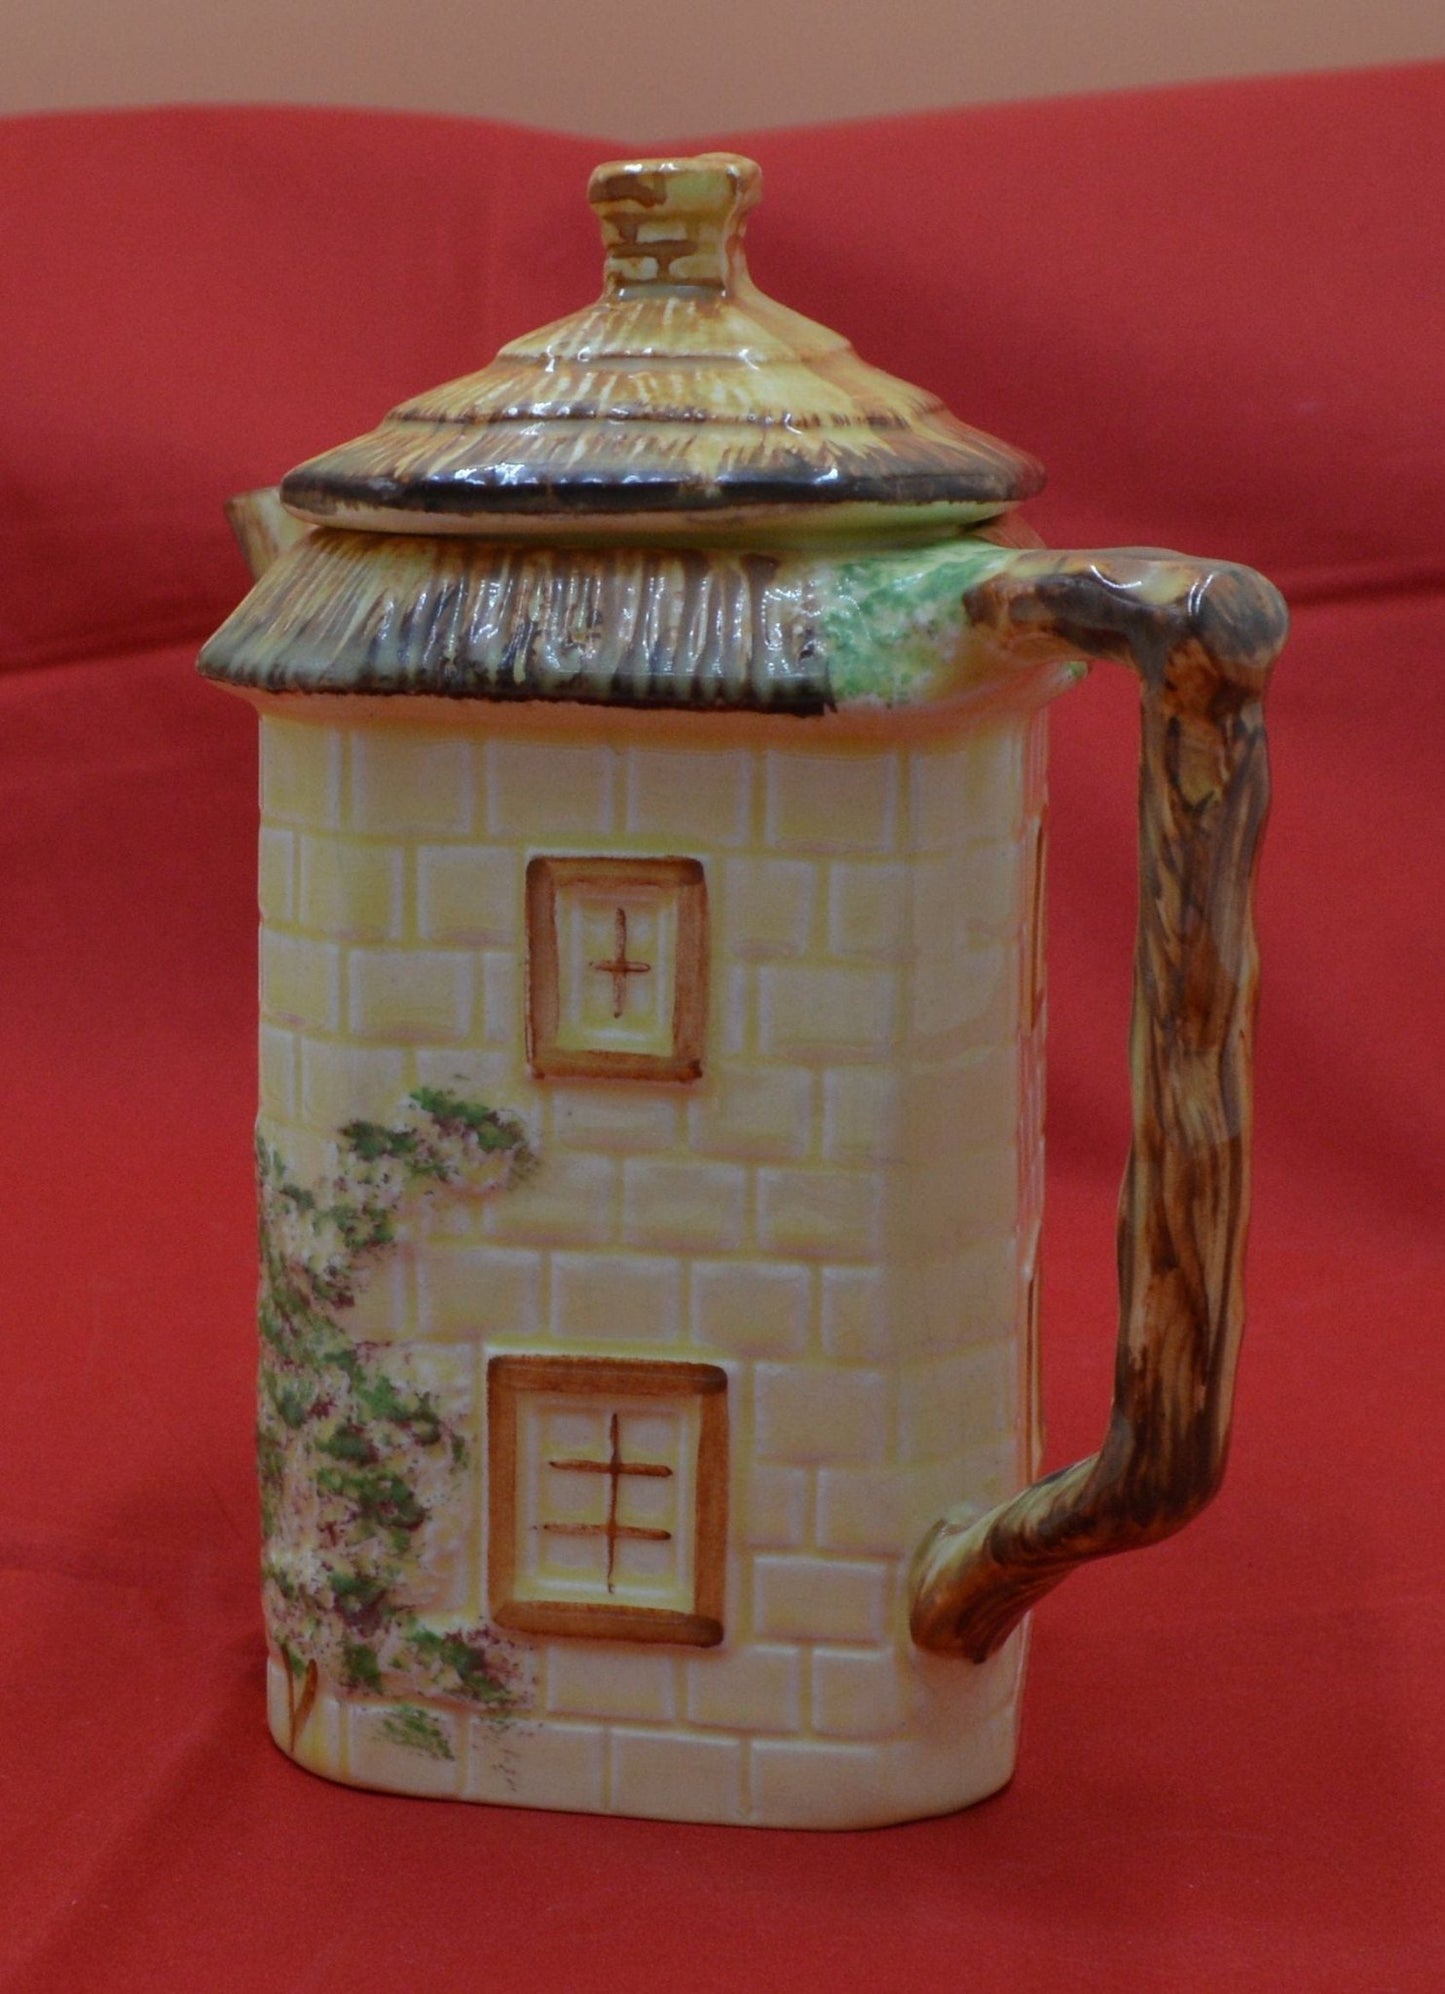 KEELE STREET POTTERY COTTAGEWARE TALL TEAPOT/COFFEE POT (PREVIOUSLY OWNED) GOOD CONDITION - TMD167207